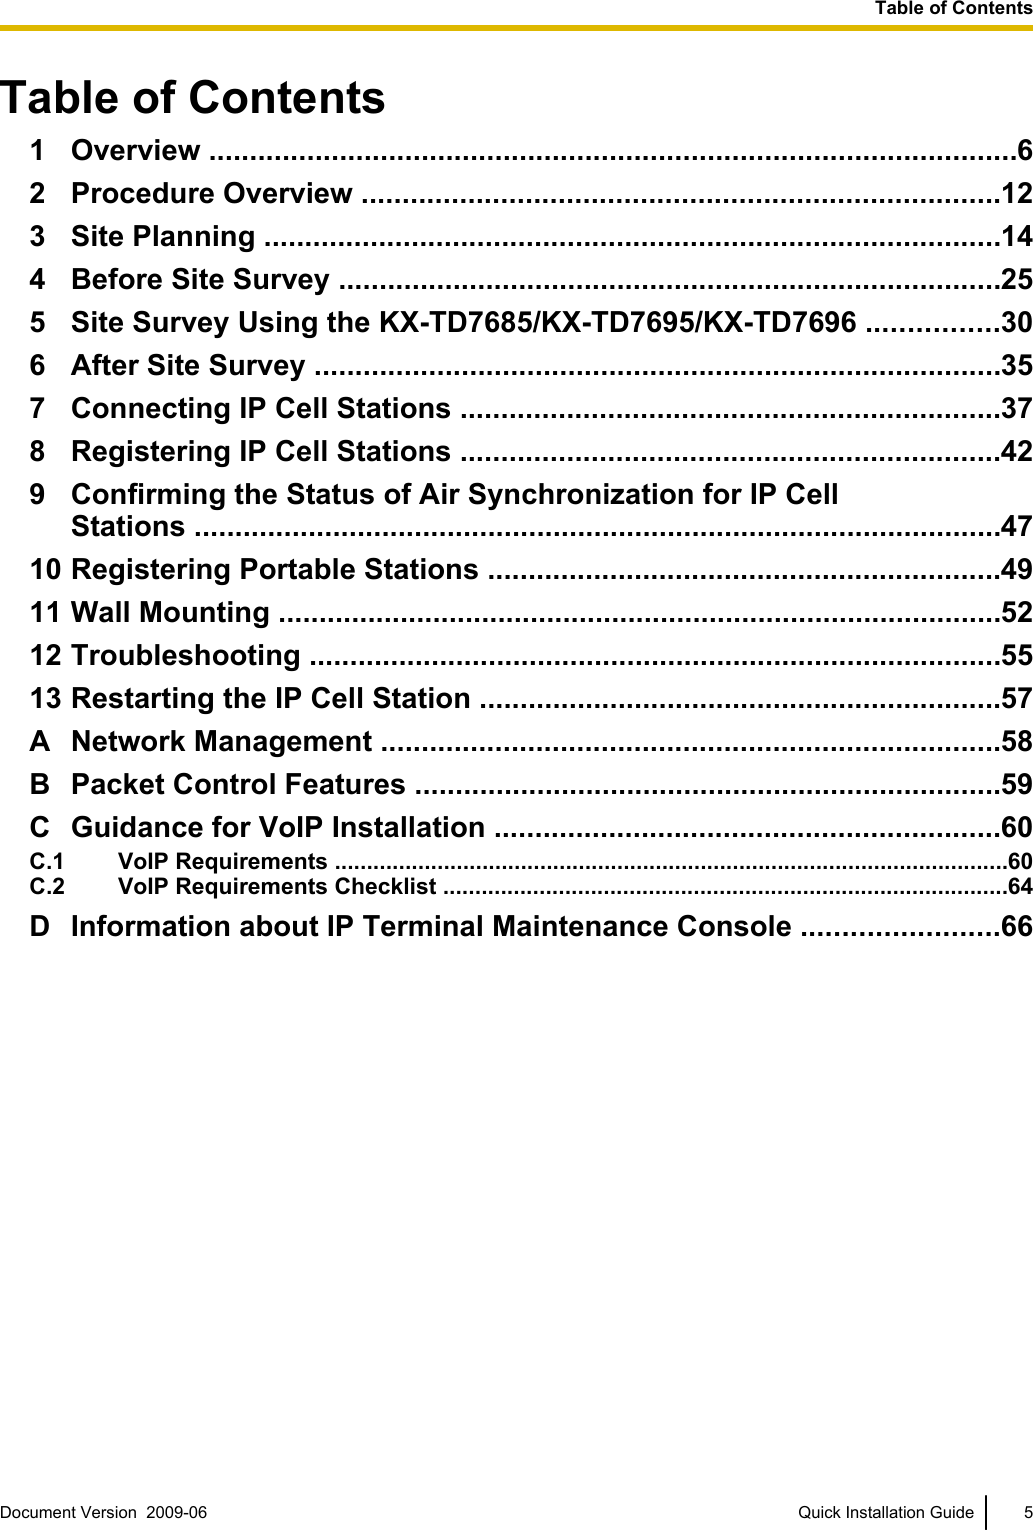 Table of Contents1 Overview ...................................................................................................62 Procedure Overview ..............................................................................123 Site Planning ..........................................................................................144 Before Site Survey .................................................................................255 Site Survey Using the KX-TD7685/KX-TD7695/KX-TD7696 ................306 After Site Survey ....................................................................................357 Connecting IP Cell Stations ..................................................................378 Registering IP Cell Stations ..................................................................429 Confirming the Status of Air Synchronization for IP CellStations ...................................................................................................4710 Registering Portable Stations ...............................................................4911 Wall Mounting .........................................................................................5212 Troubleshooting .....................................................................................5513 Restarting the IP Cell Station ................................................................57A Network Management ............................................................................58B Packet Control Features ........................................................................59C Guidance for VoIP Installation ..............................................................60C.1 VoIP Requirements .........................................................................................................60C.2 VoIP Requirements Checklist ........................................................................................64D Information about IP Terminal Maintenance Console ........................66Document Version  2009-06   Quick Installation Guide 5Table of Contents